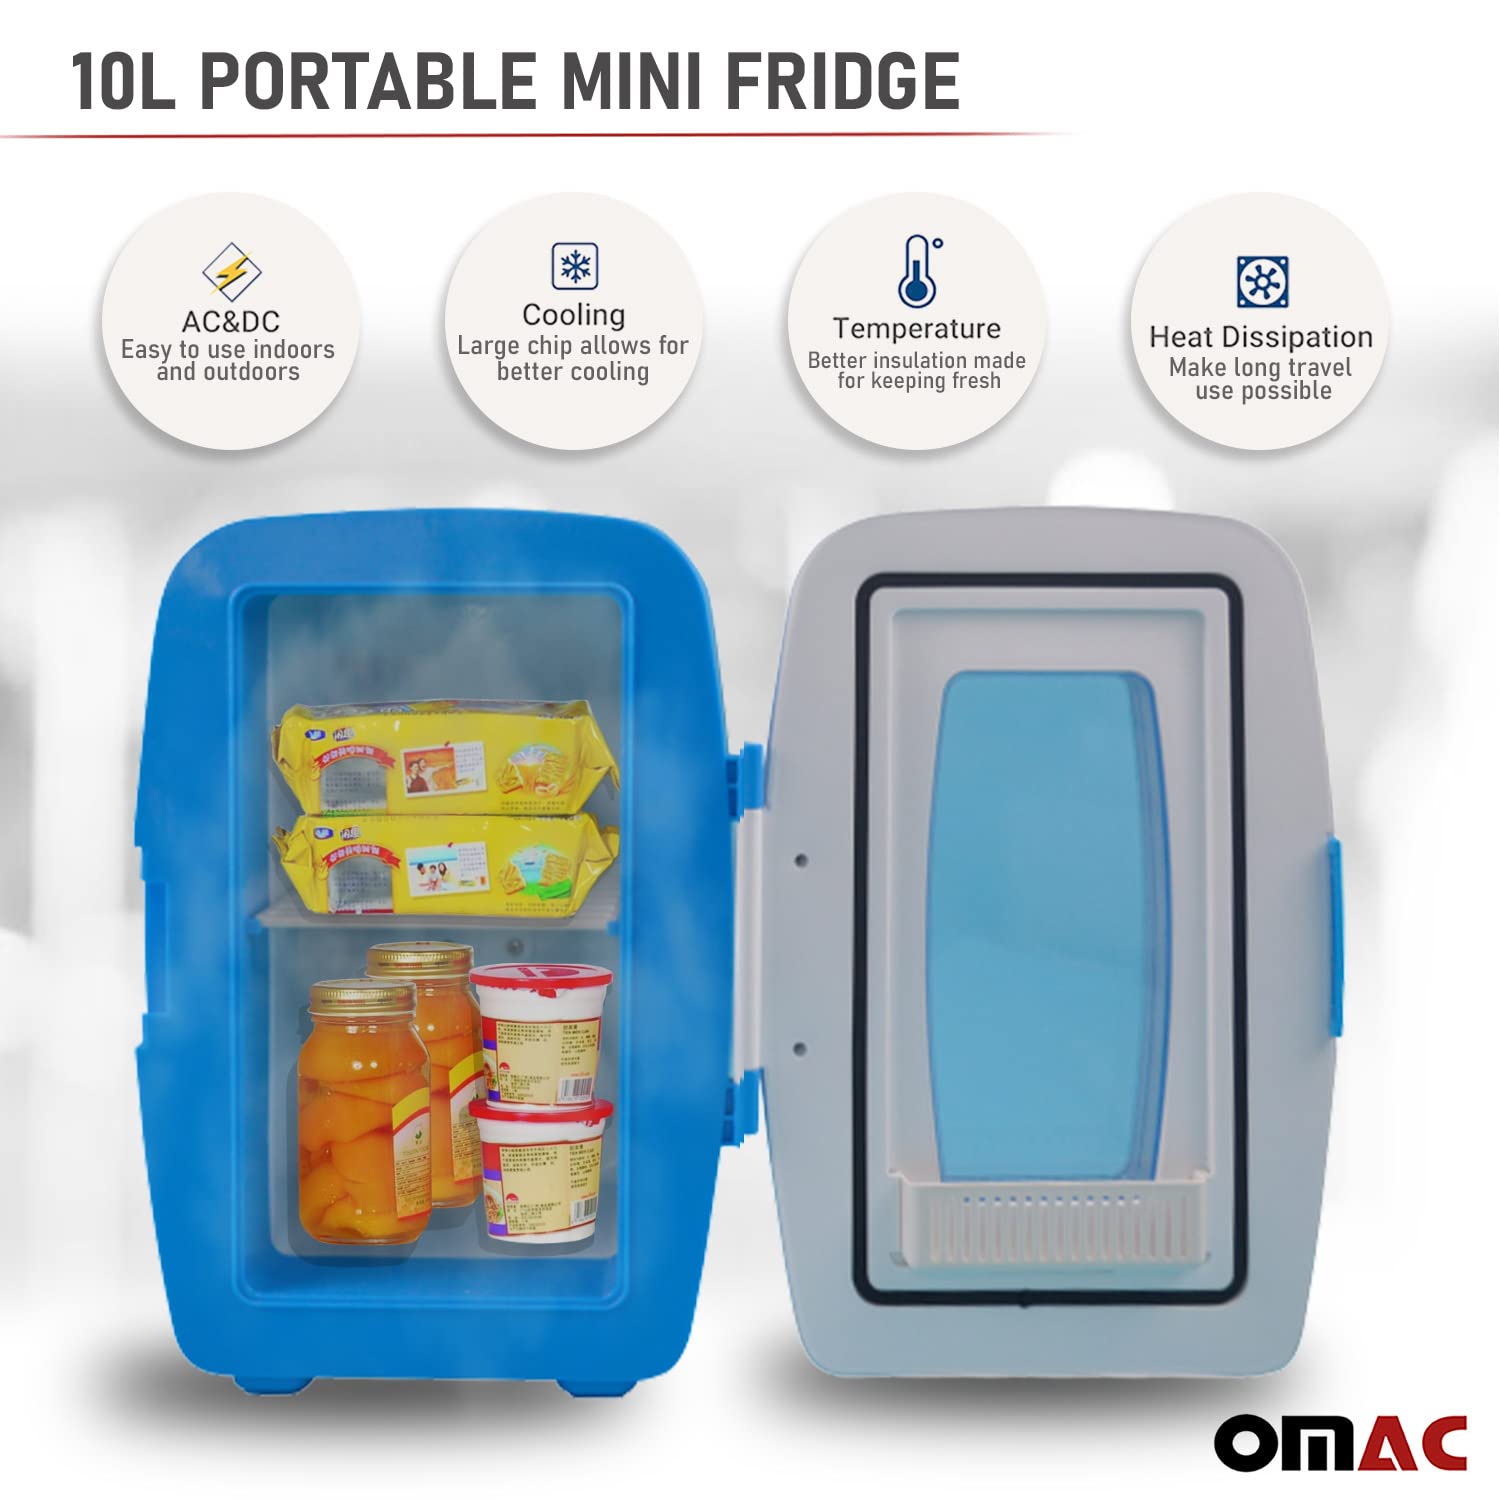 OMAC Mini Fridge for Cosmetics Camping Home Office and Car, Portable, 12V, AC/DC Power, 10 Liter, White